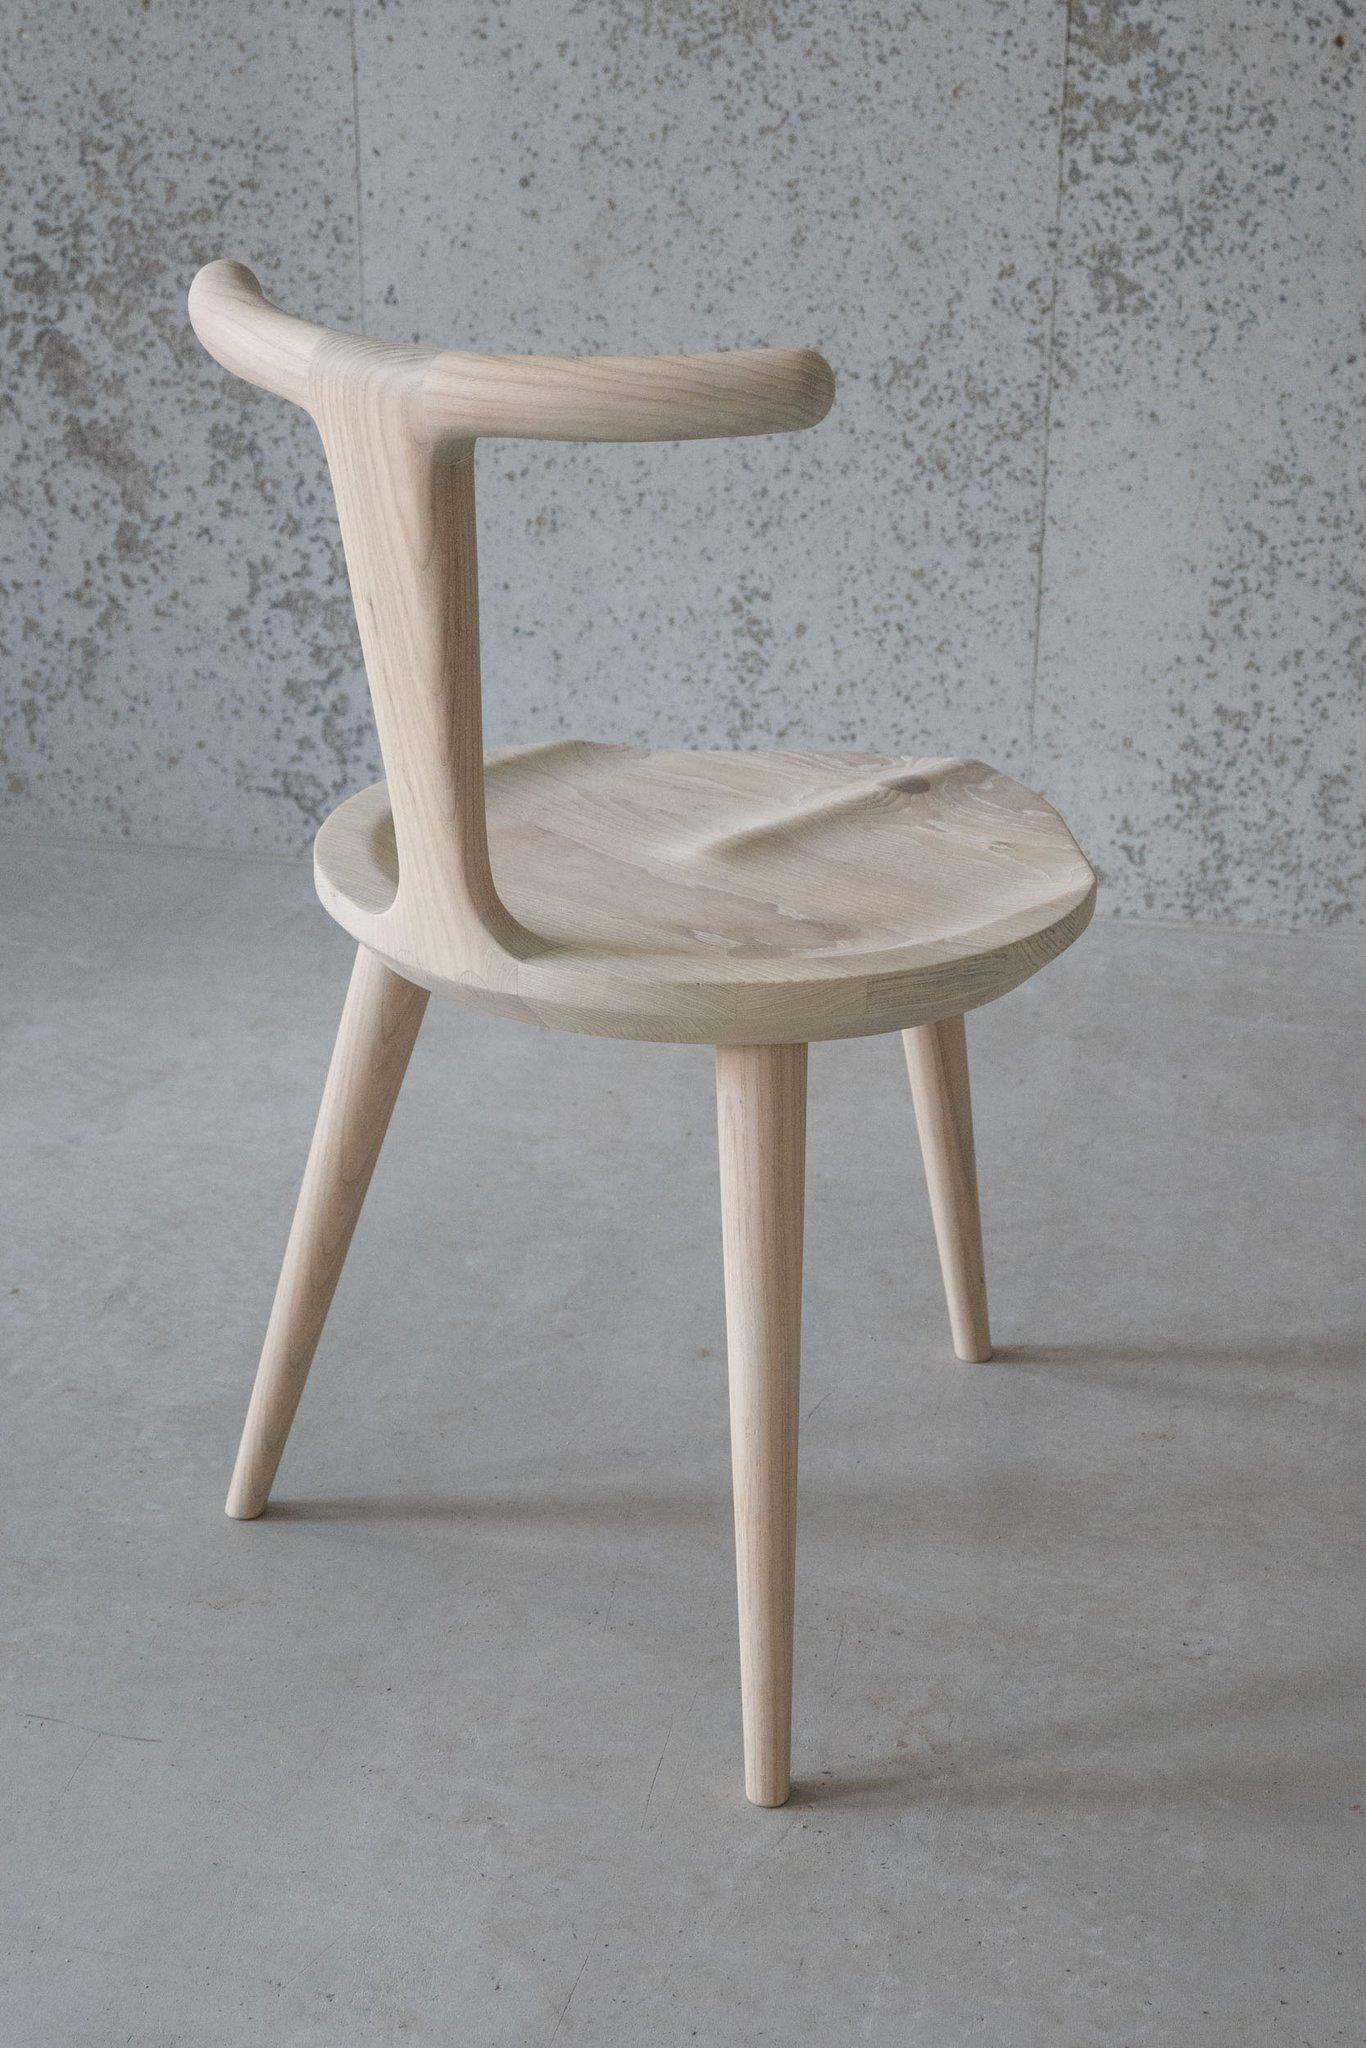 American White Ash Oxbend Chair 3 Legs by Fernweh Woodworking